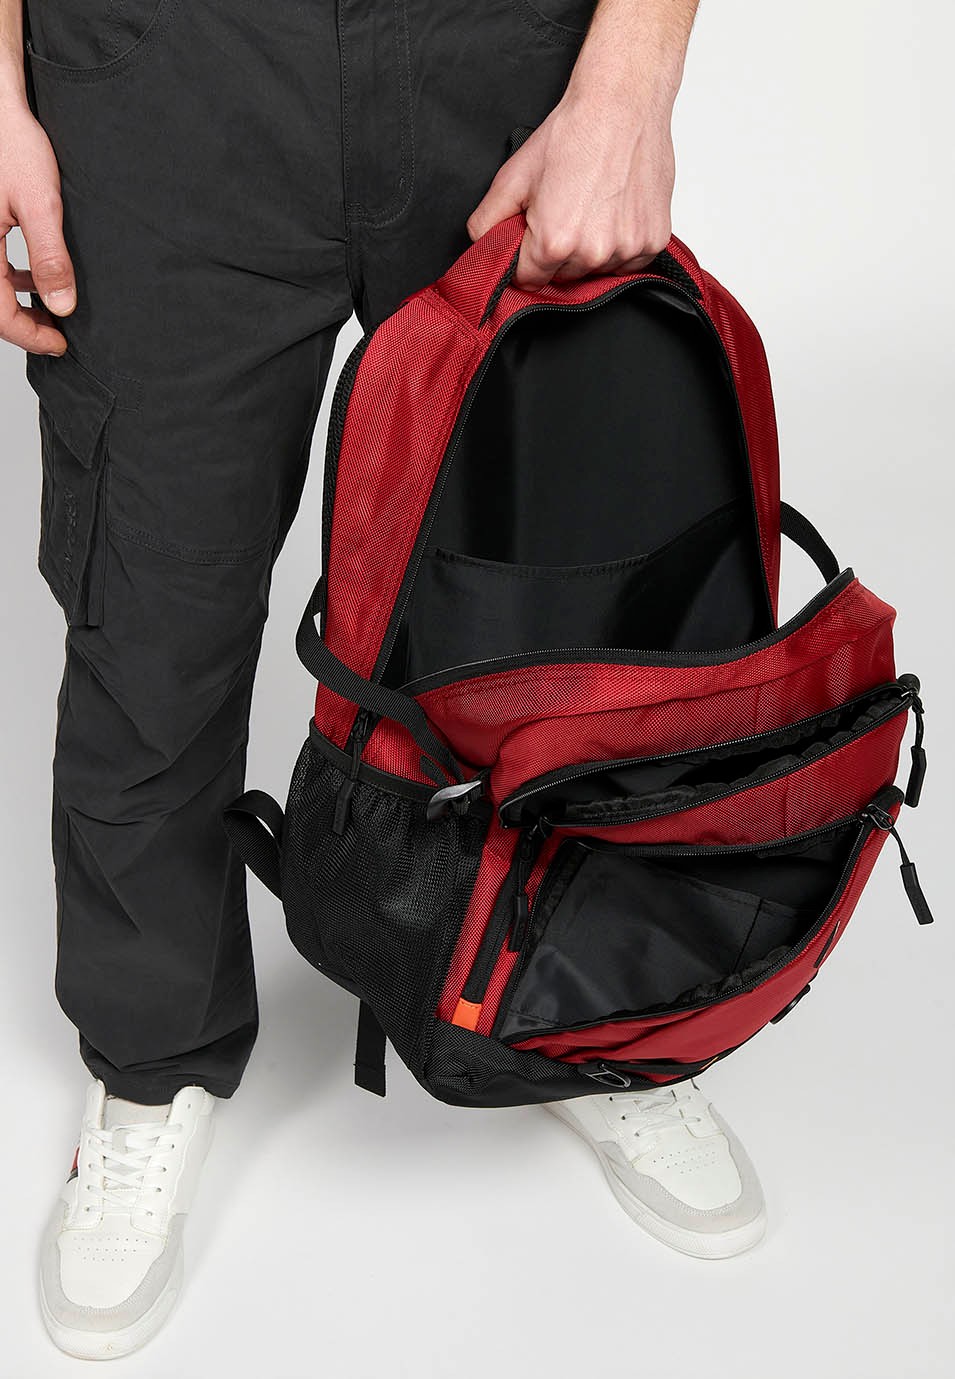 Koröshi backpack with three zippered compartments, one for laptop, with red interior pockets 8